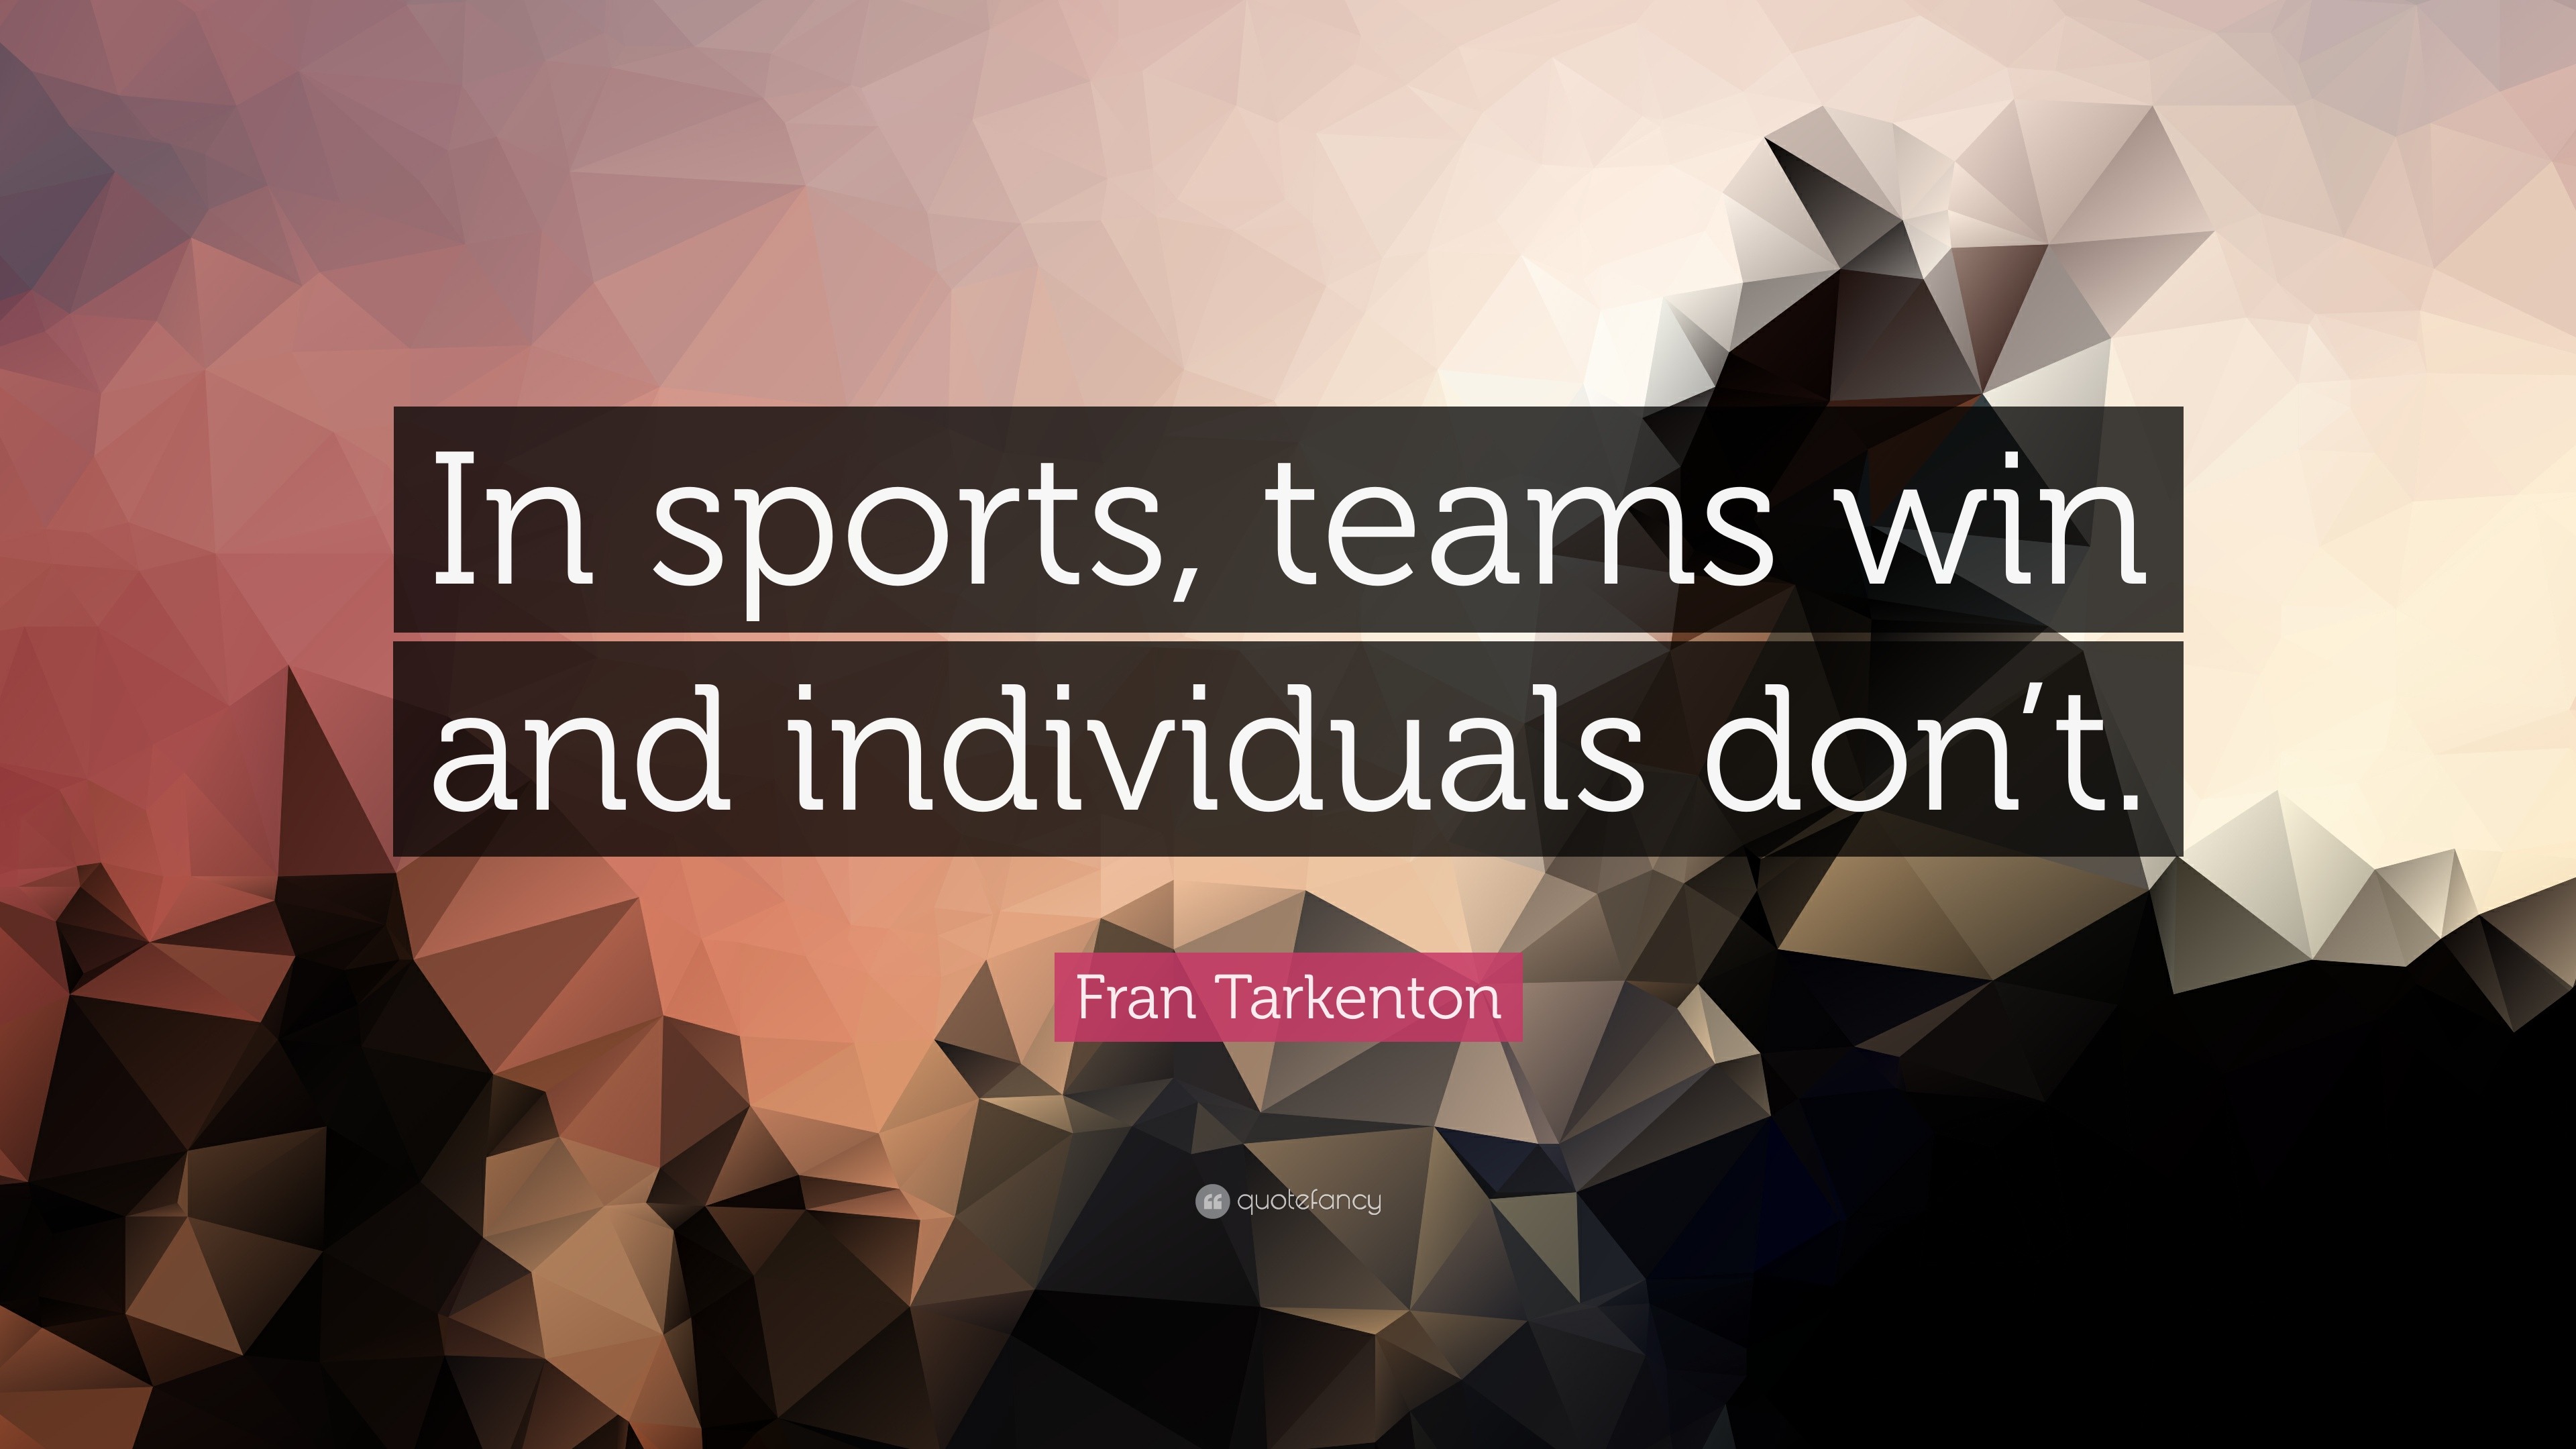 Fran Tarkenton Quote: “In sports, teams win and individuals don’t.”